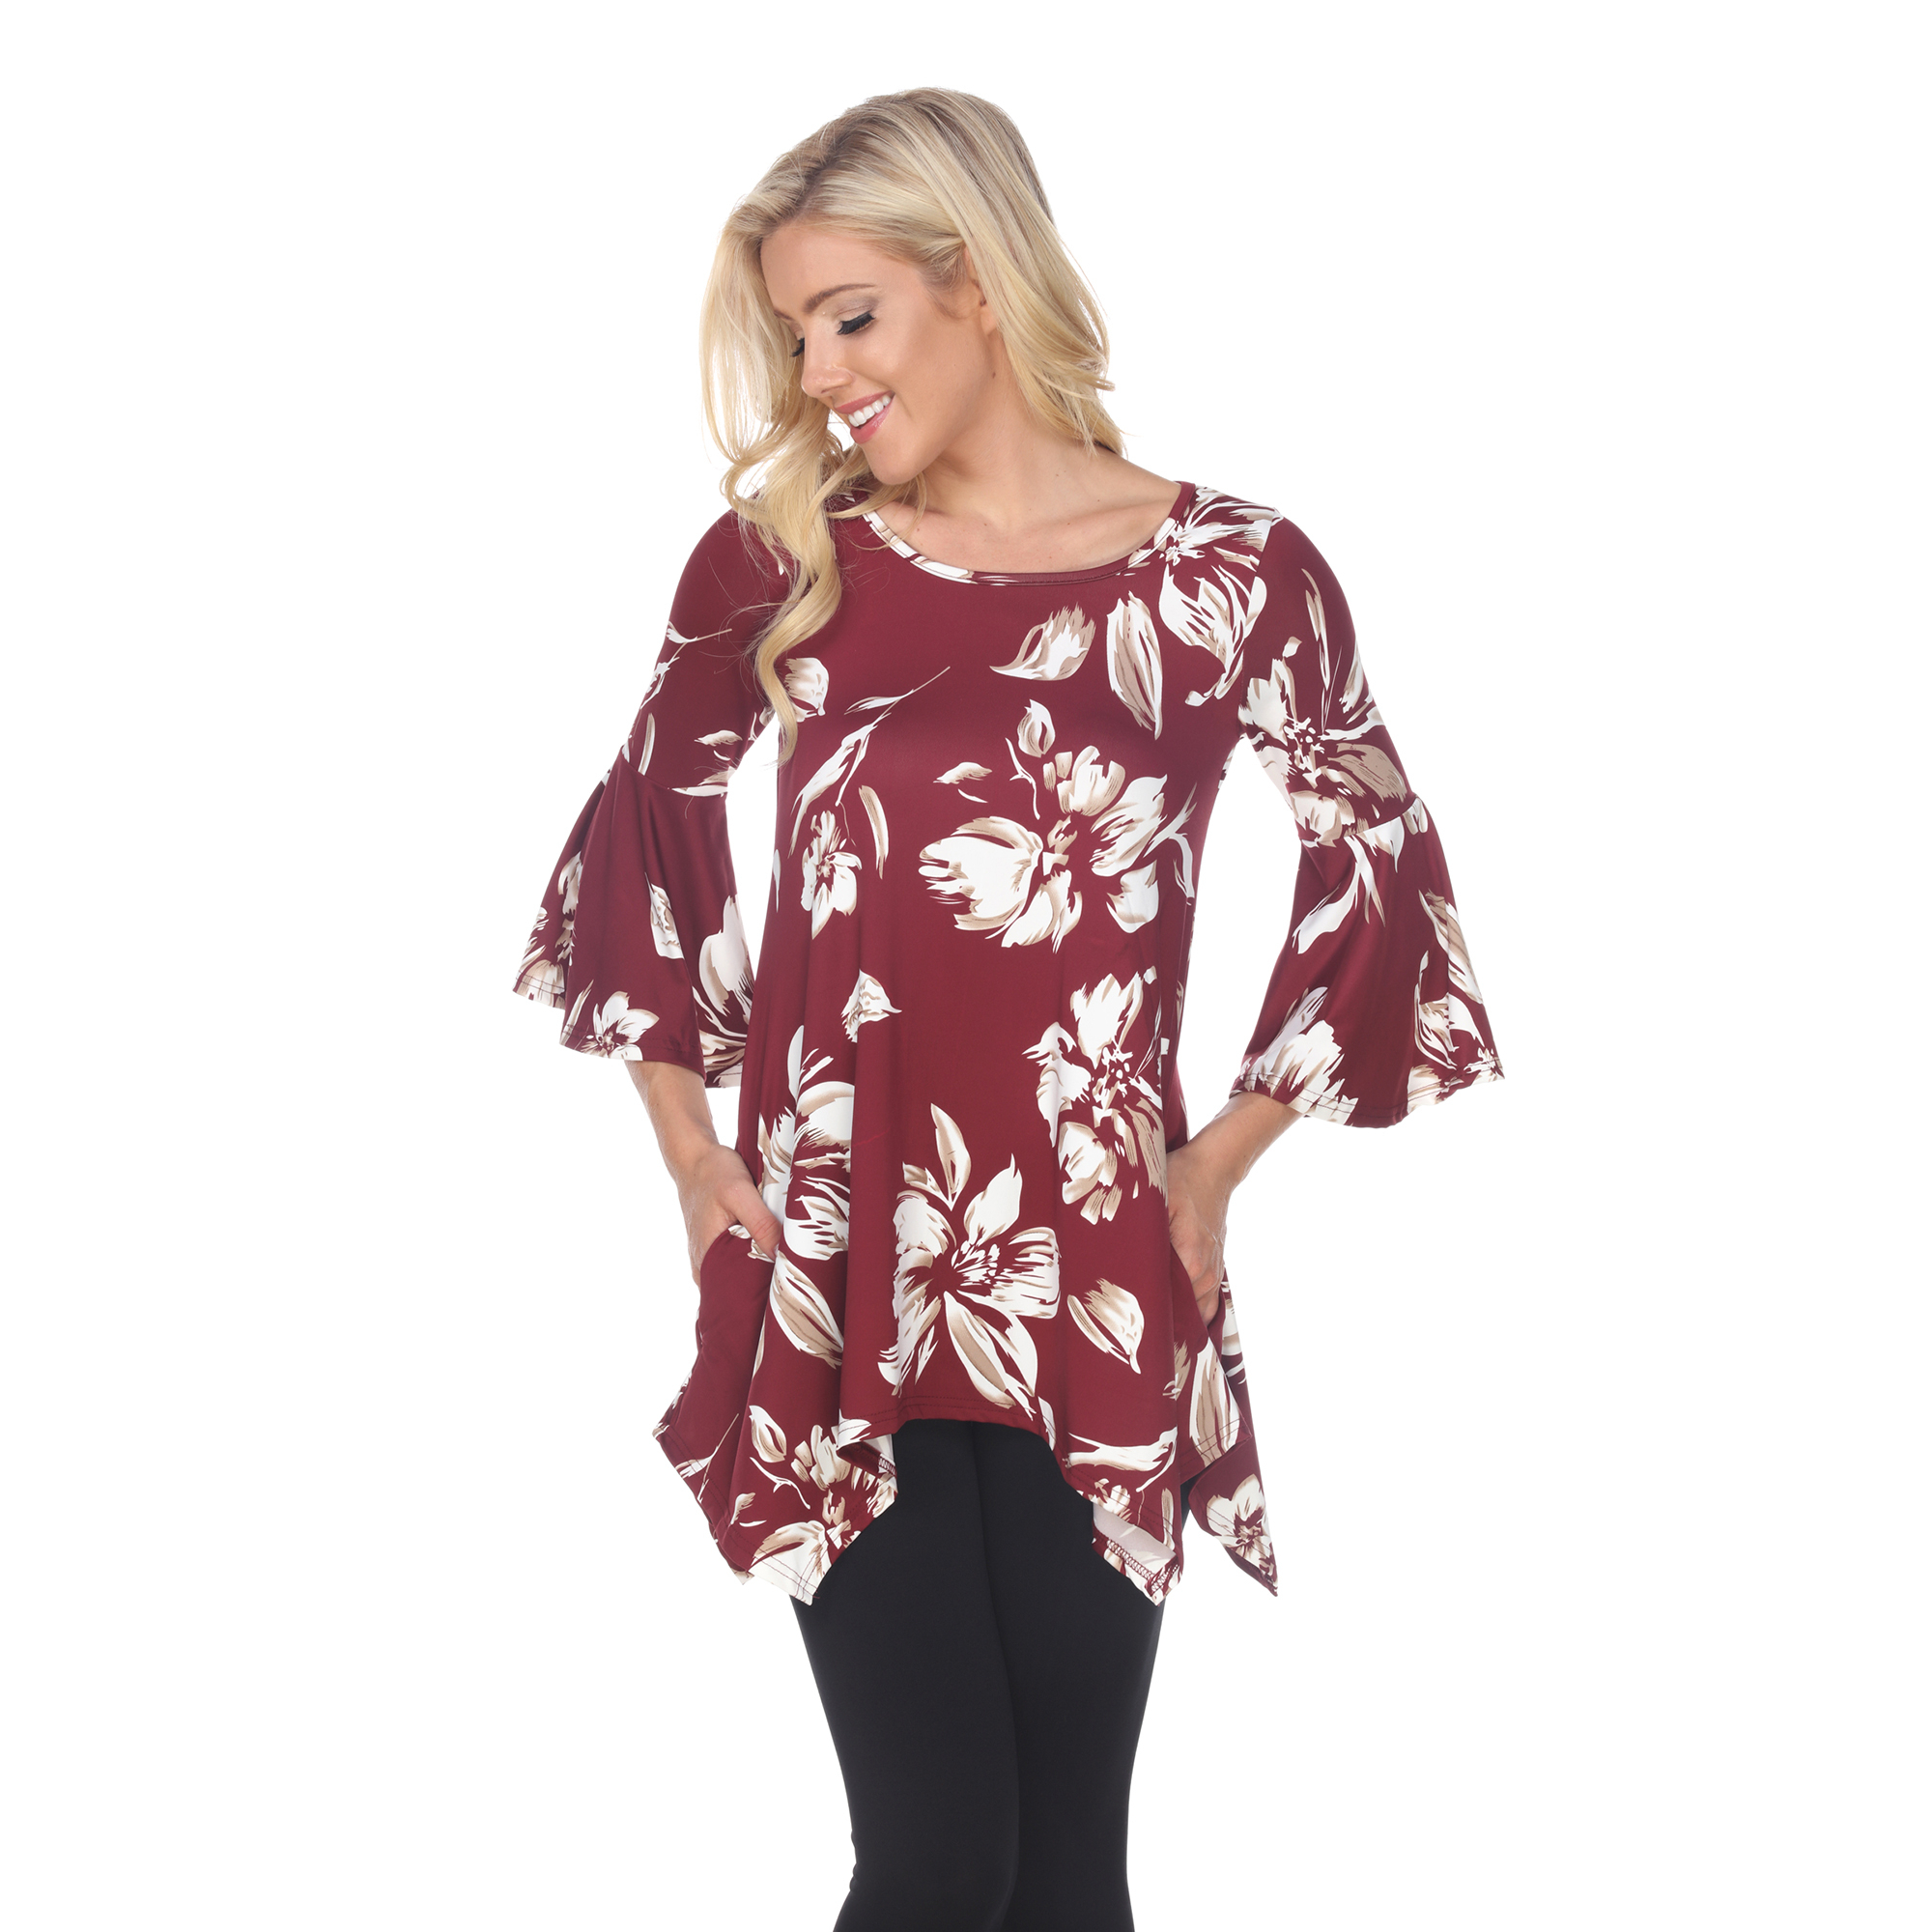 White Mark Women's Floral Print Quarter Sleeve Tunic Top With Pockets - Red, 1X